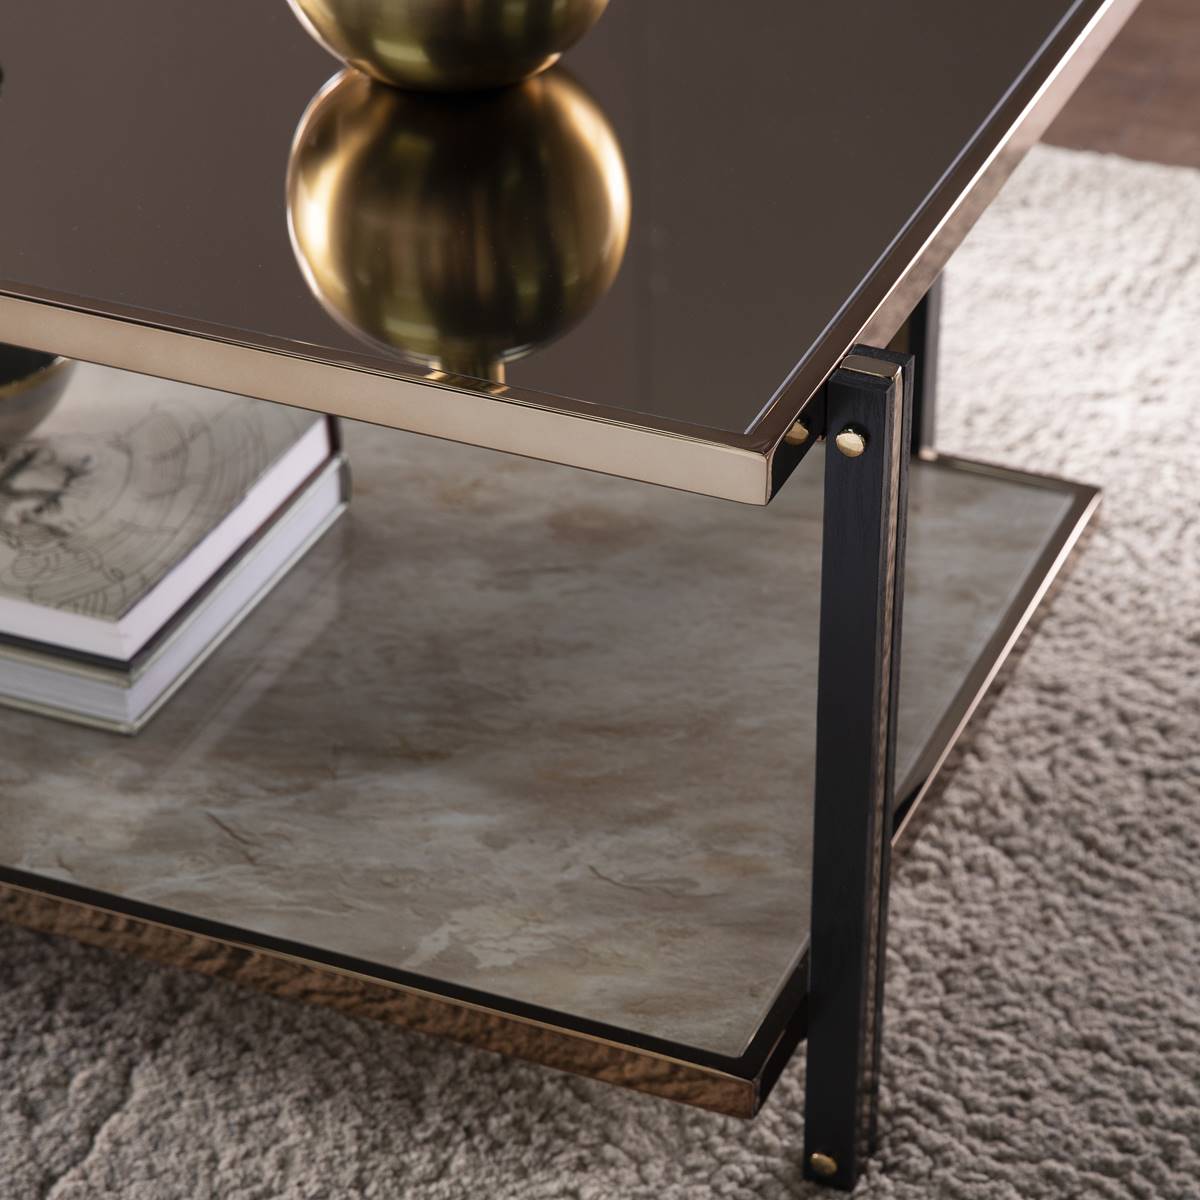 Southern Enterprises Thornsett Coffee Table W/ Mirrored Top